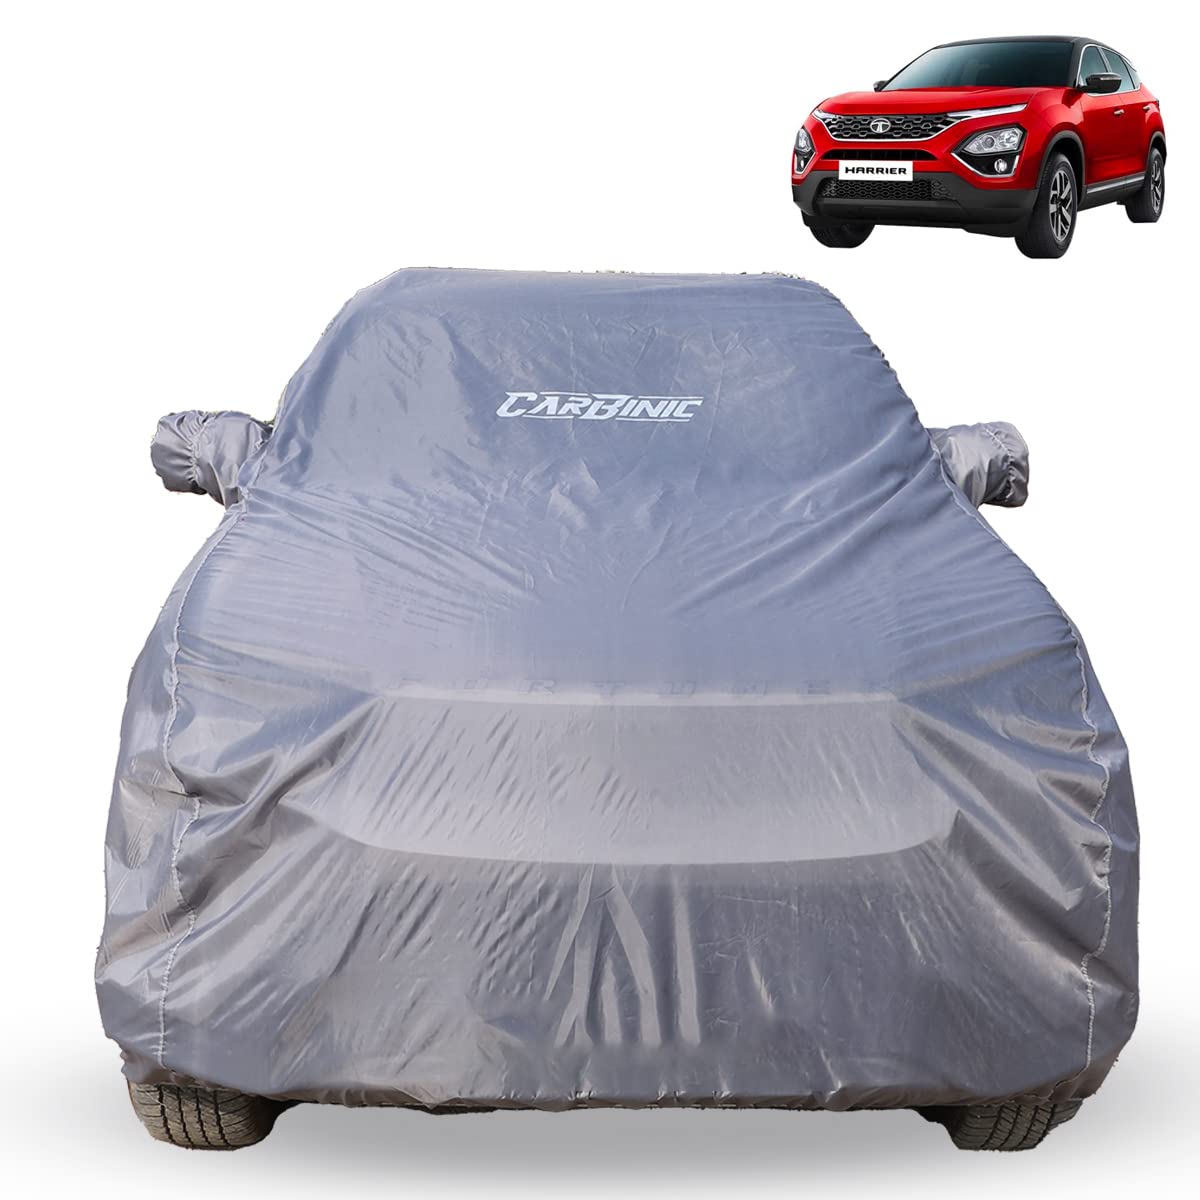 CARBINIC Car Body Cover for Tata Harrier 2019 | Water Resistant, UV Protection Car Cover | Scratchproof Body Shield | Dustproof All-Weather Cover | Mirror Pocket & Antenna | Car Accessories, Grey